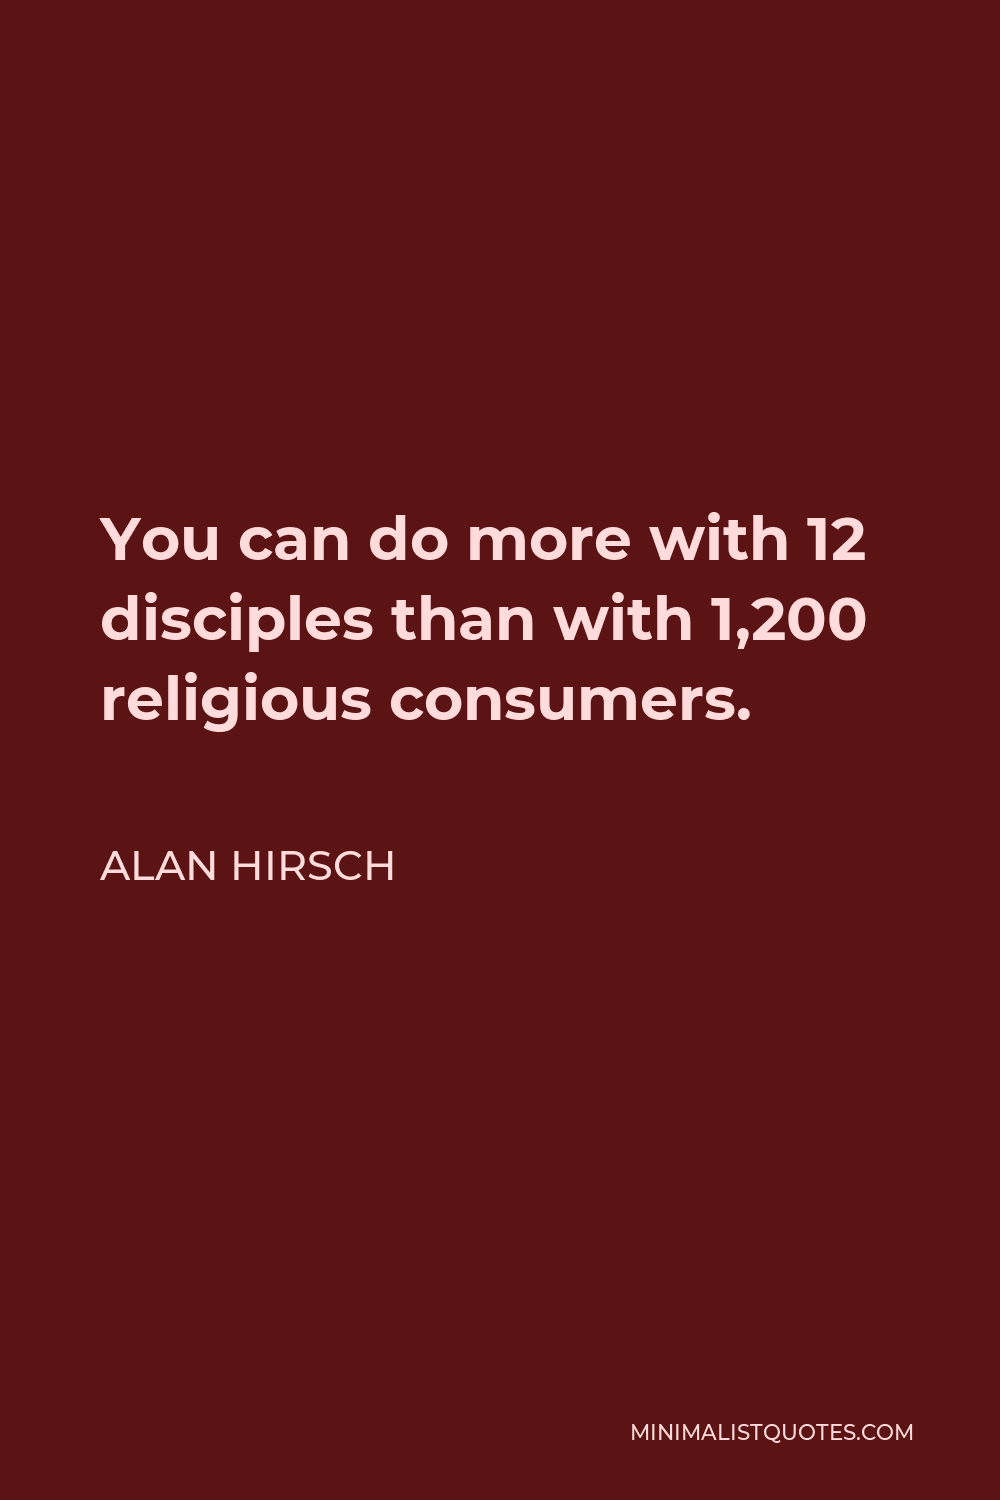 Alan Hirsch Quote - You can do more with 12 disciples than with 1,200 religious consumers.